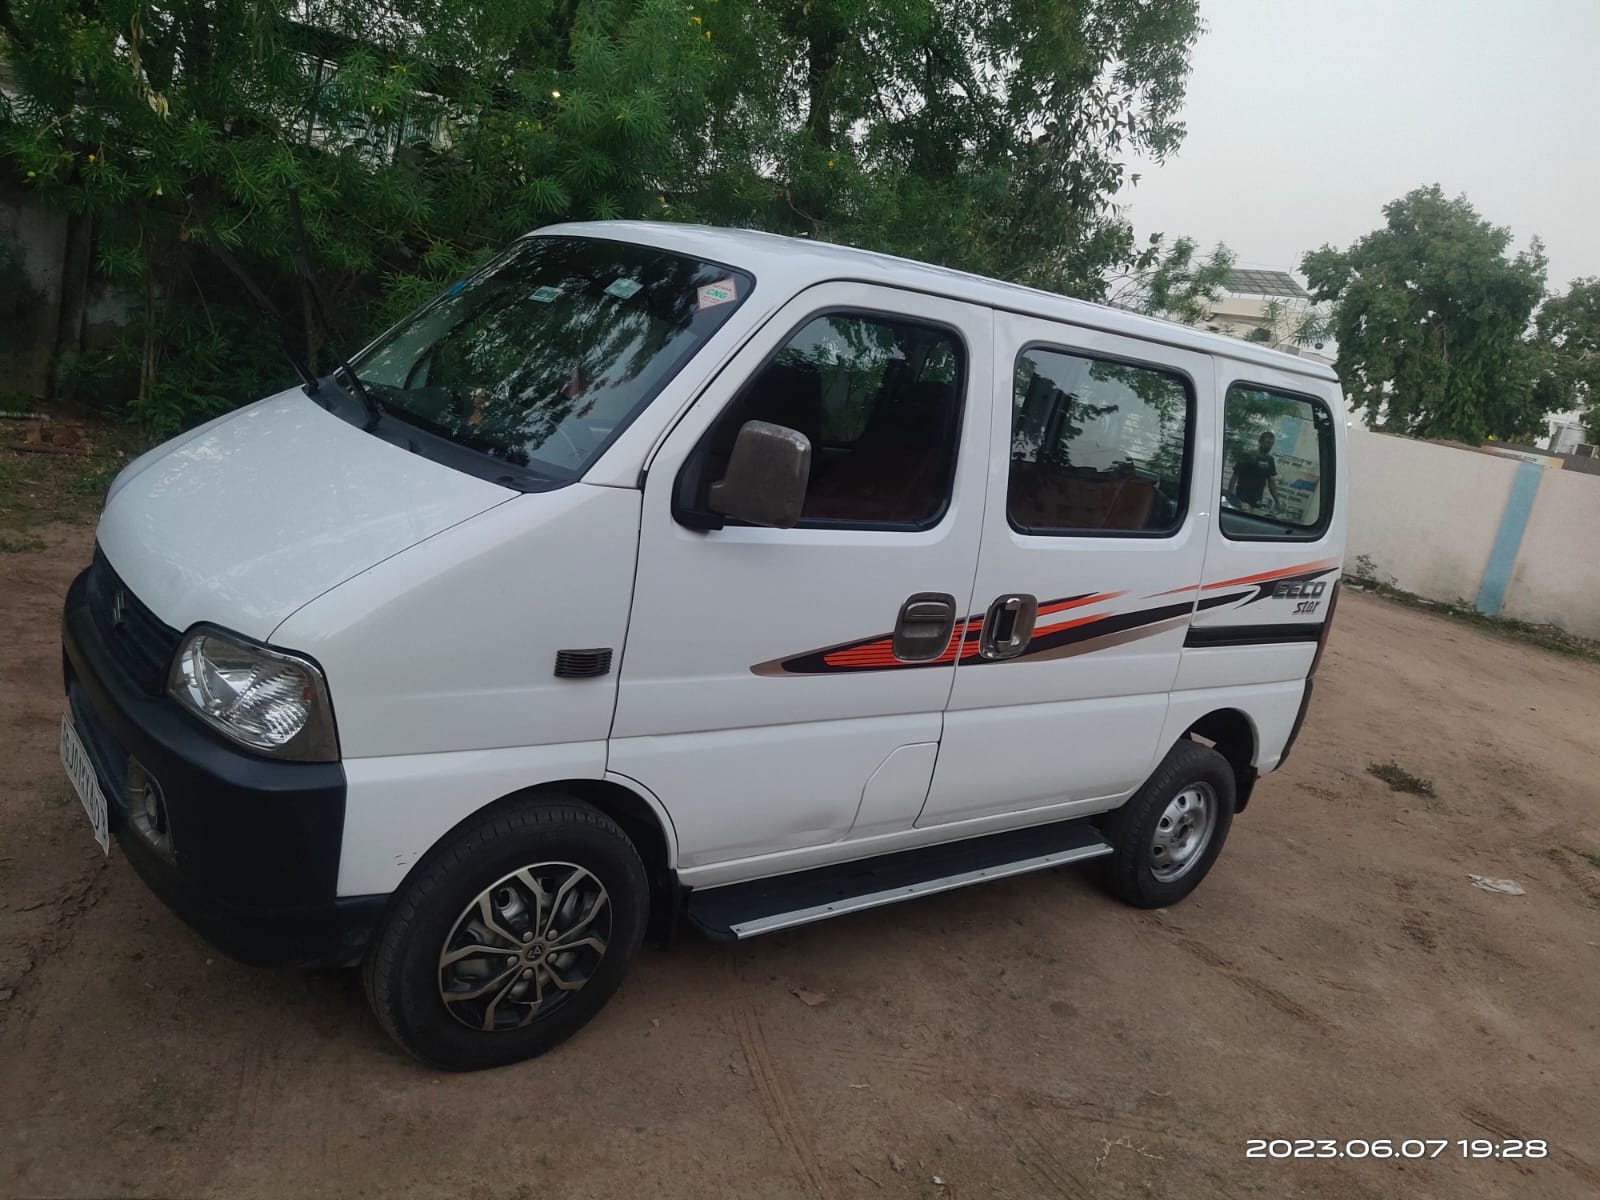 Details View - Maruti Suzuki Eeco photos - reseller,reseller marketplace,advetising your products,reseller bazzar,resellerbazzar.in,india's classified site,Maruti Suzuki Eeco , Old Maruti Suzuki Eeco, Used Maruti Suzuki Eeco in Ahmedabad ,Maruti Suzuki Eeco in Ahmedabad